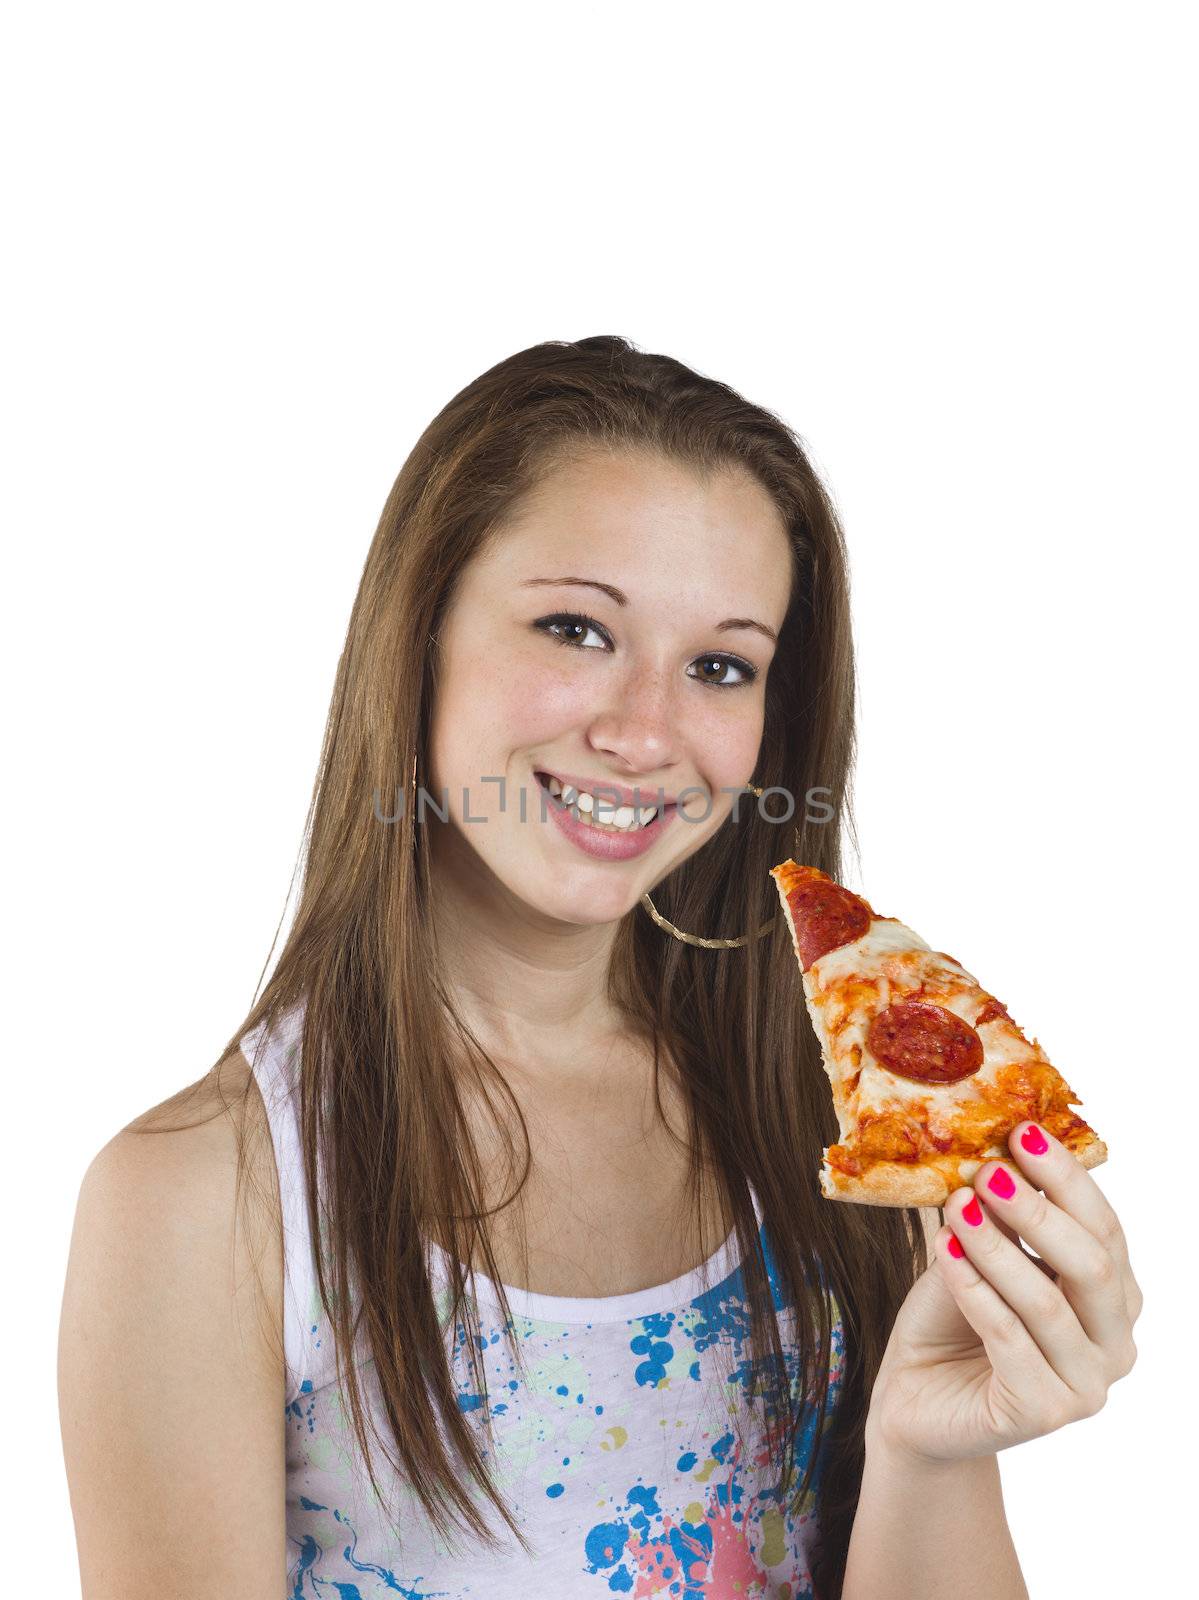 Portrait of a teenage girl holding a slice of pizza against white background.